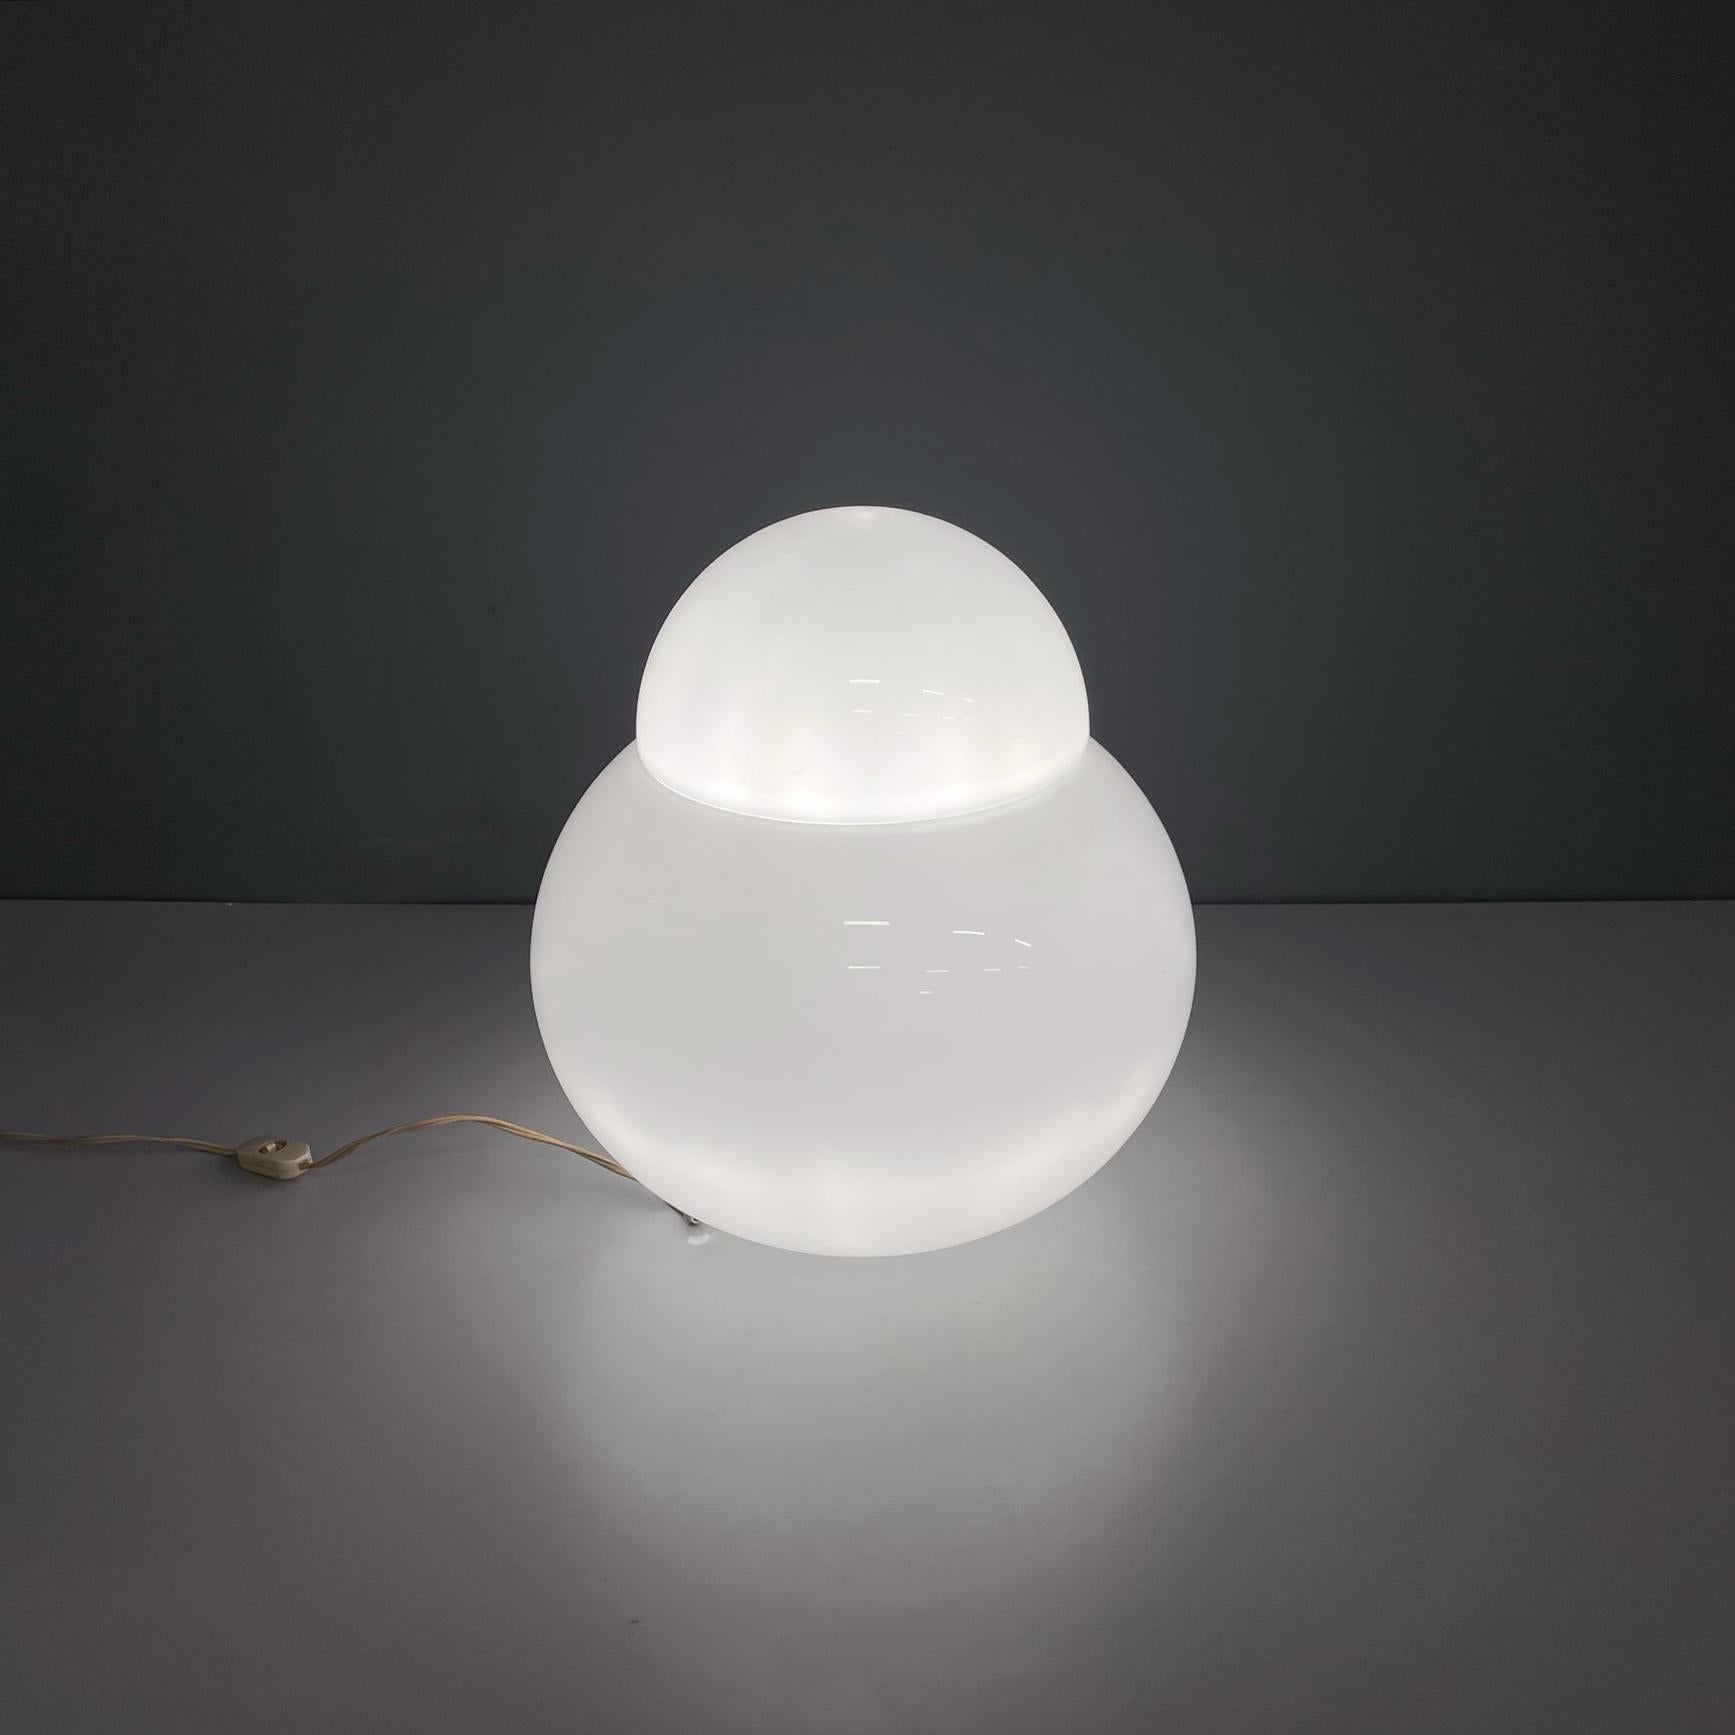 Italian modern Opaline glass Table lamp Daruma by Asti for Fontana Arte, 1970s
Table lamp mod. Daruma with round base. The rounded structure of the diffuser is made up of two hemispherical parts in hand-blown opaline glass.
Produced by Fontana